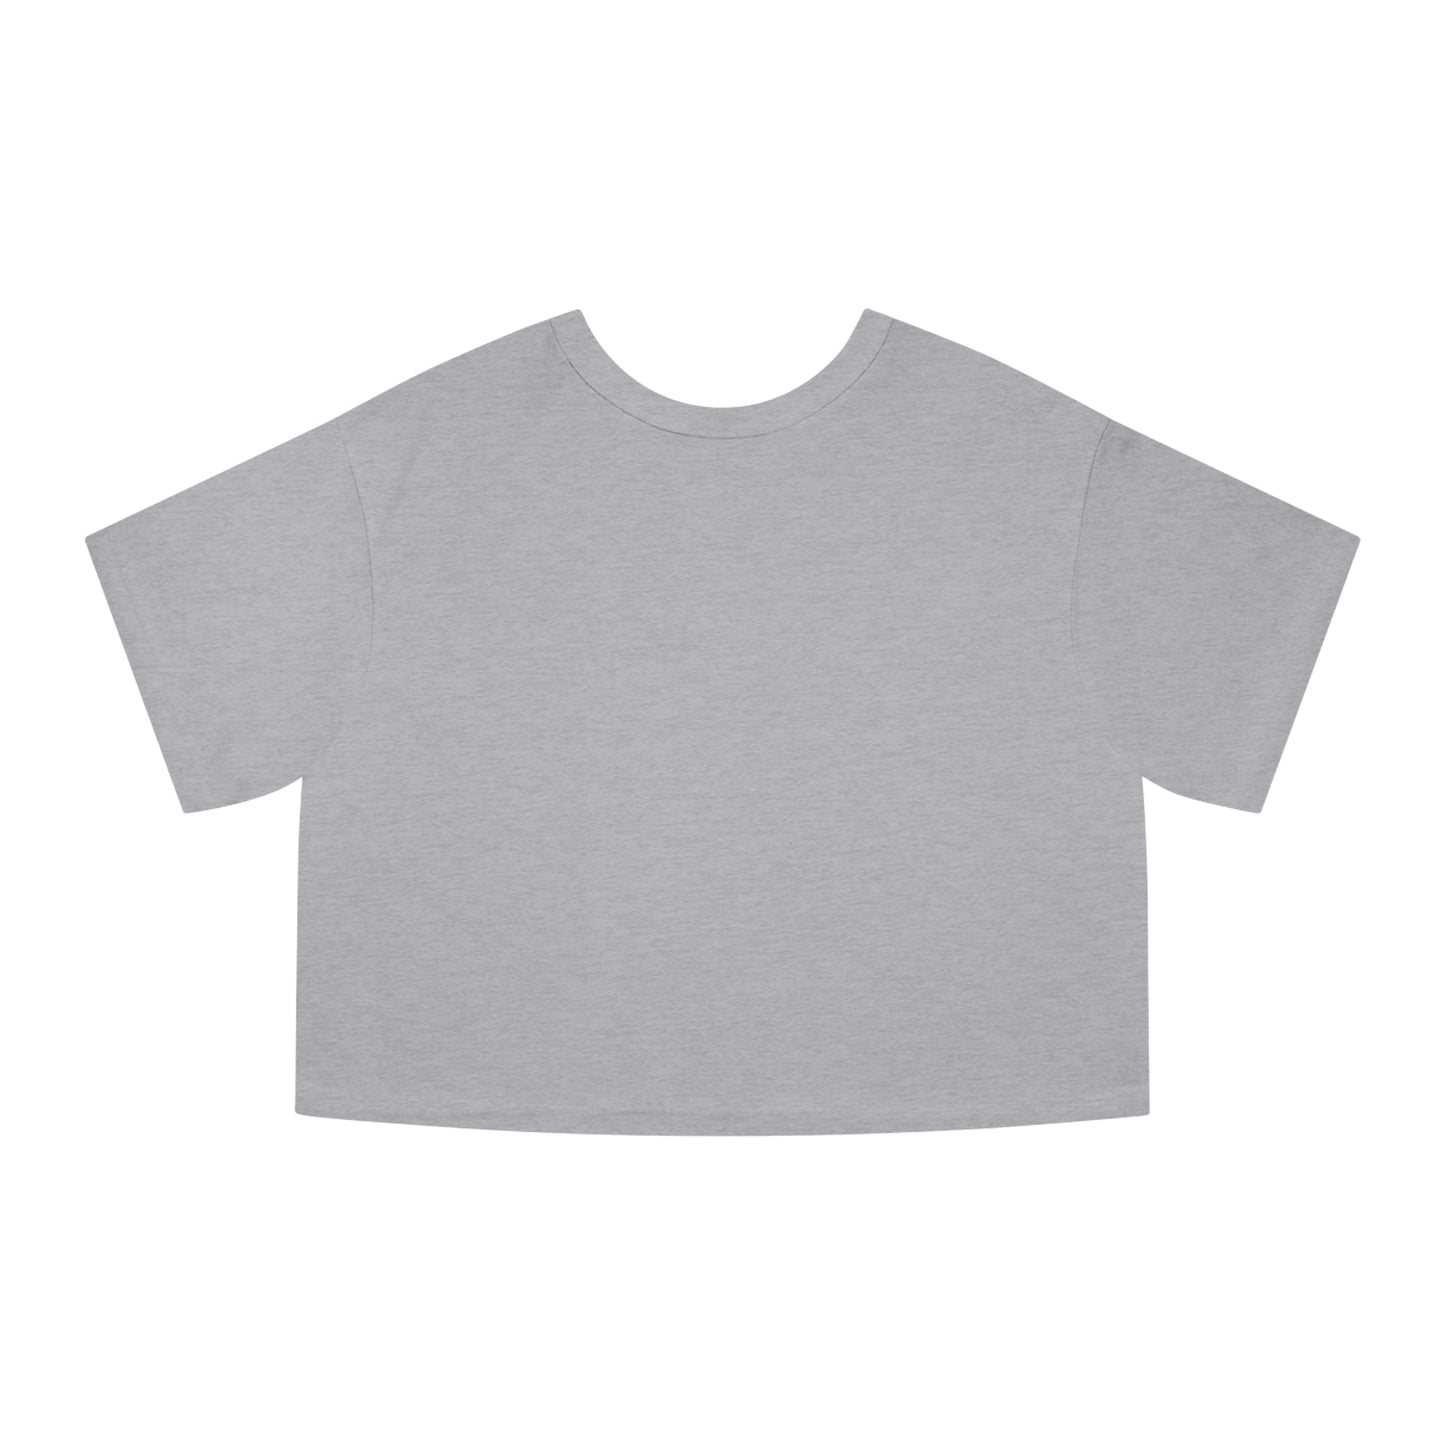 Hydrate | Champion Women's Heritage Cropped T-Shirt